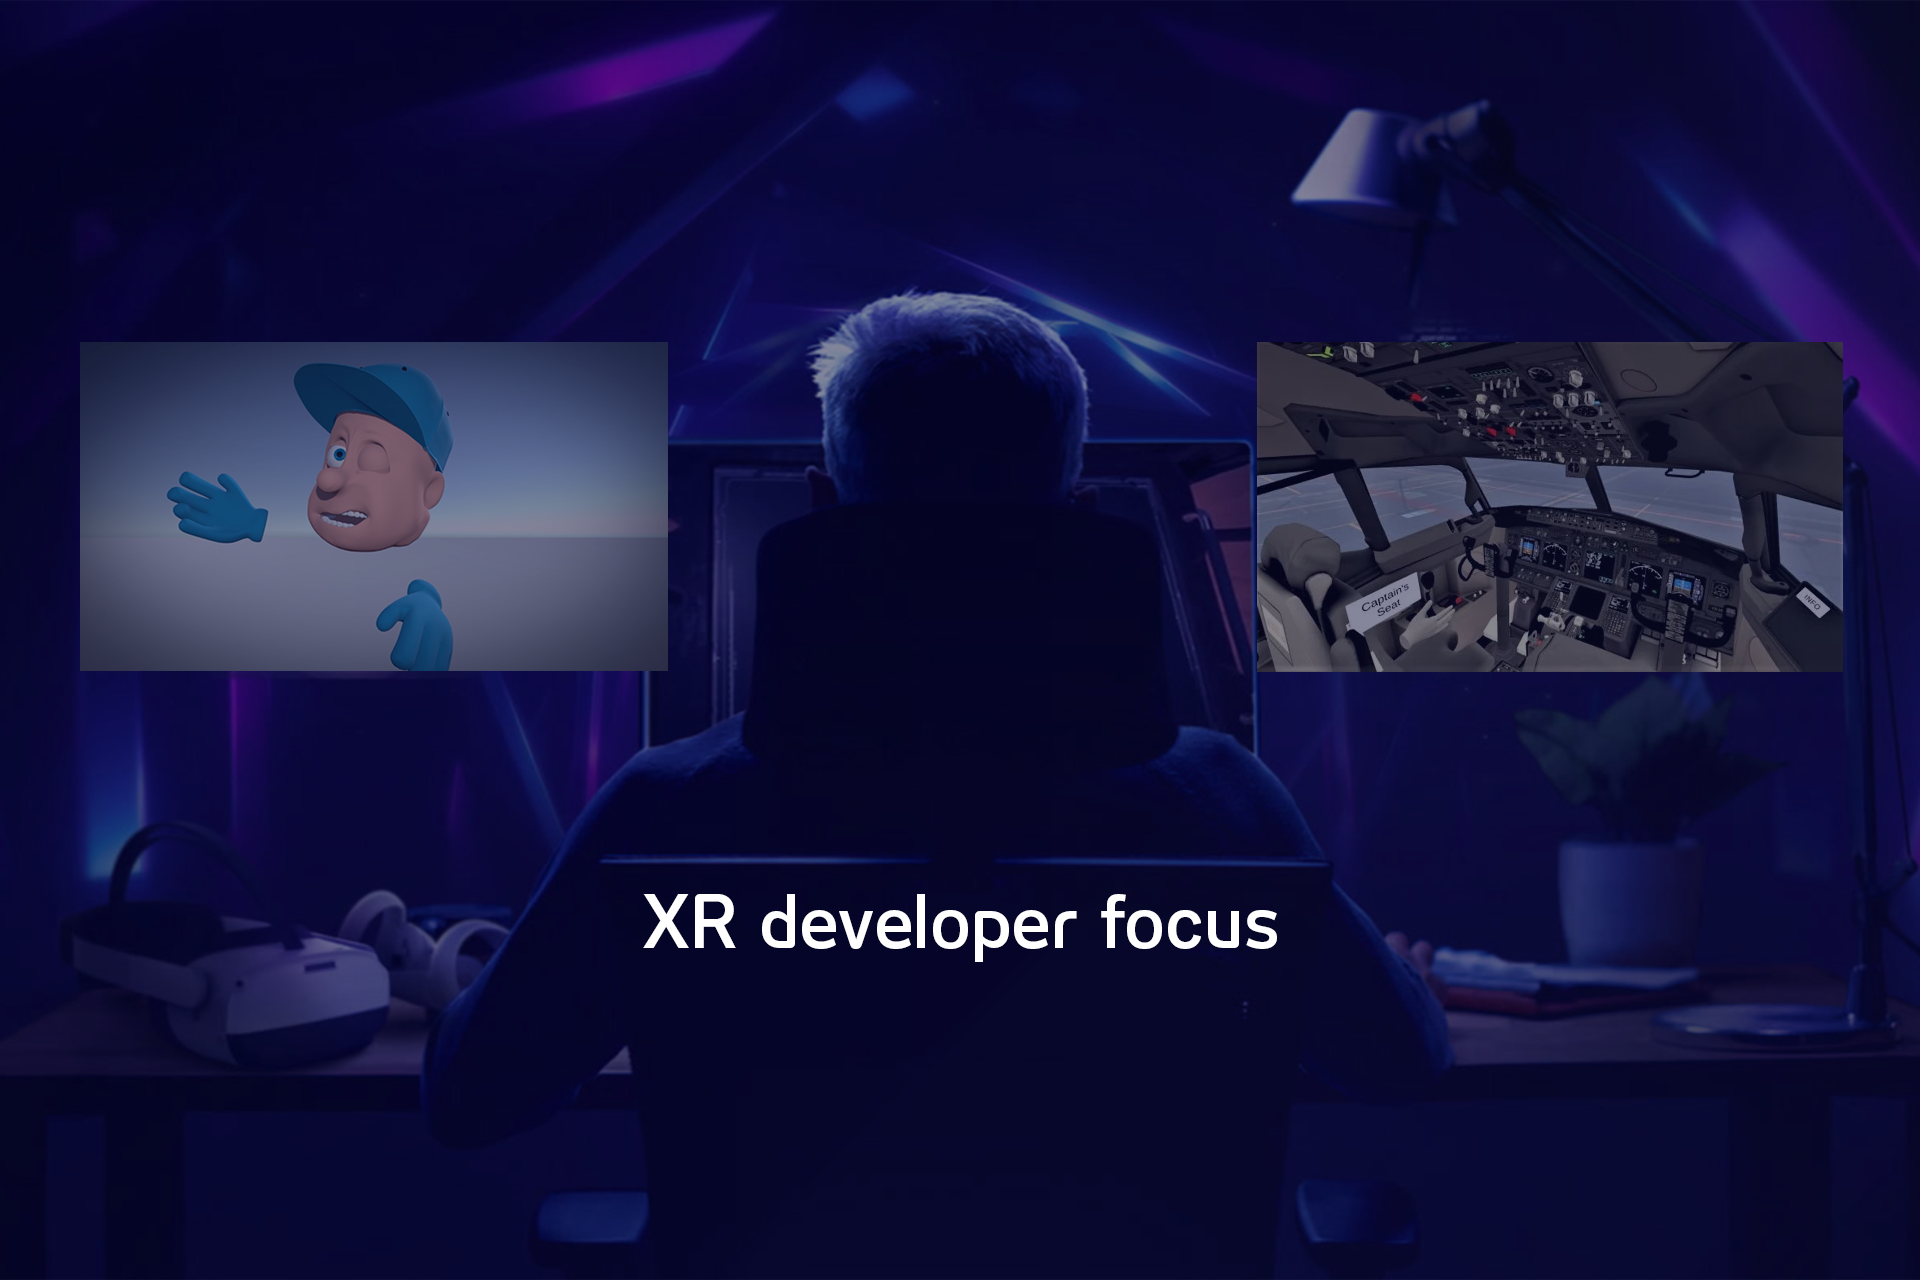 XR developer adding eye tracking to avatars in games and simulation training